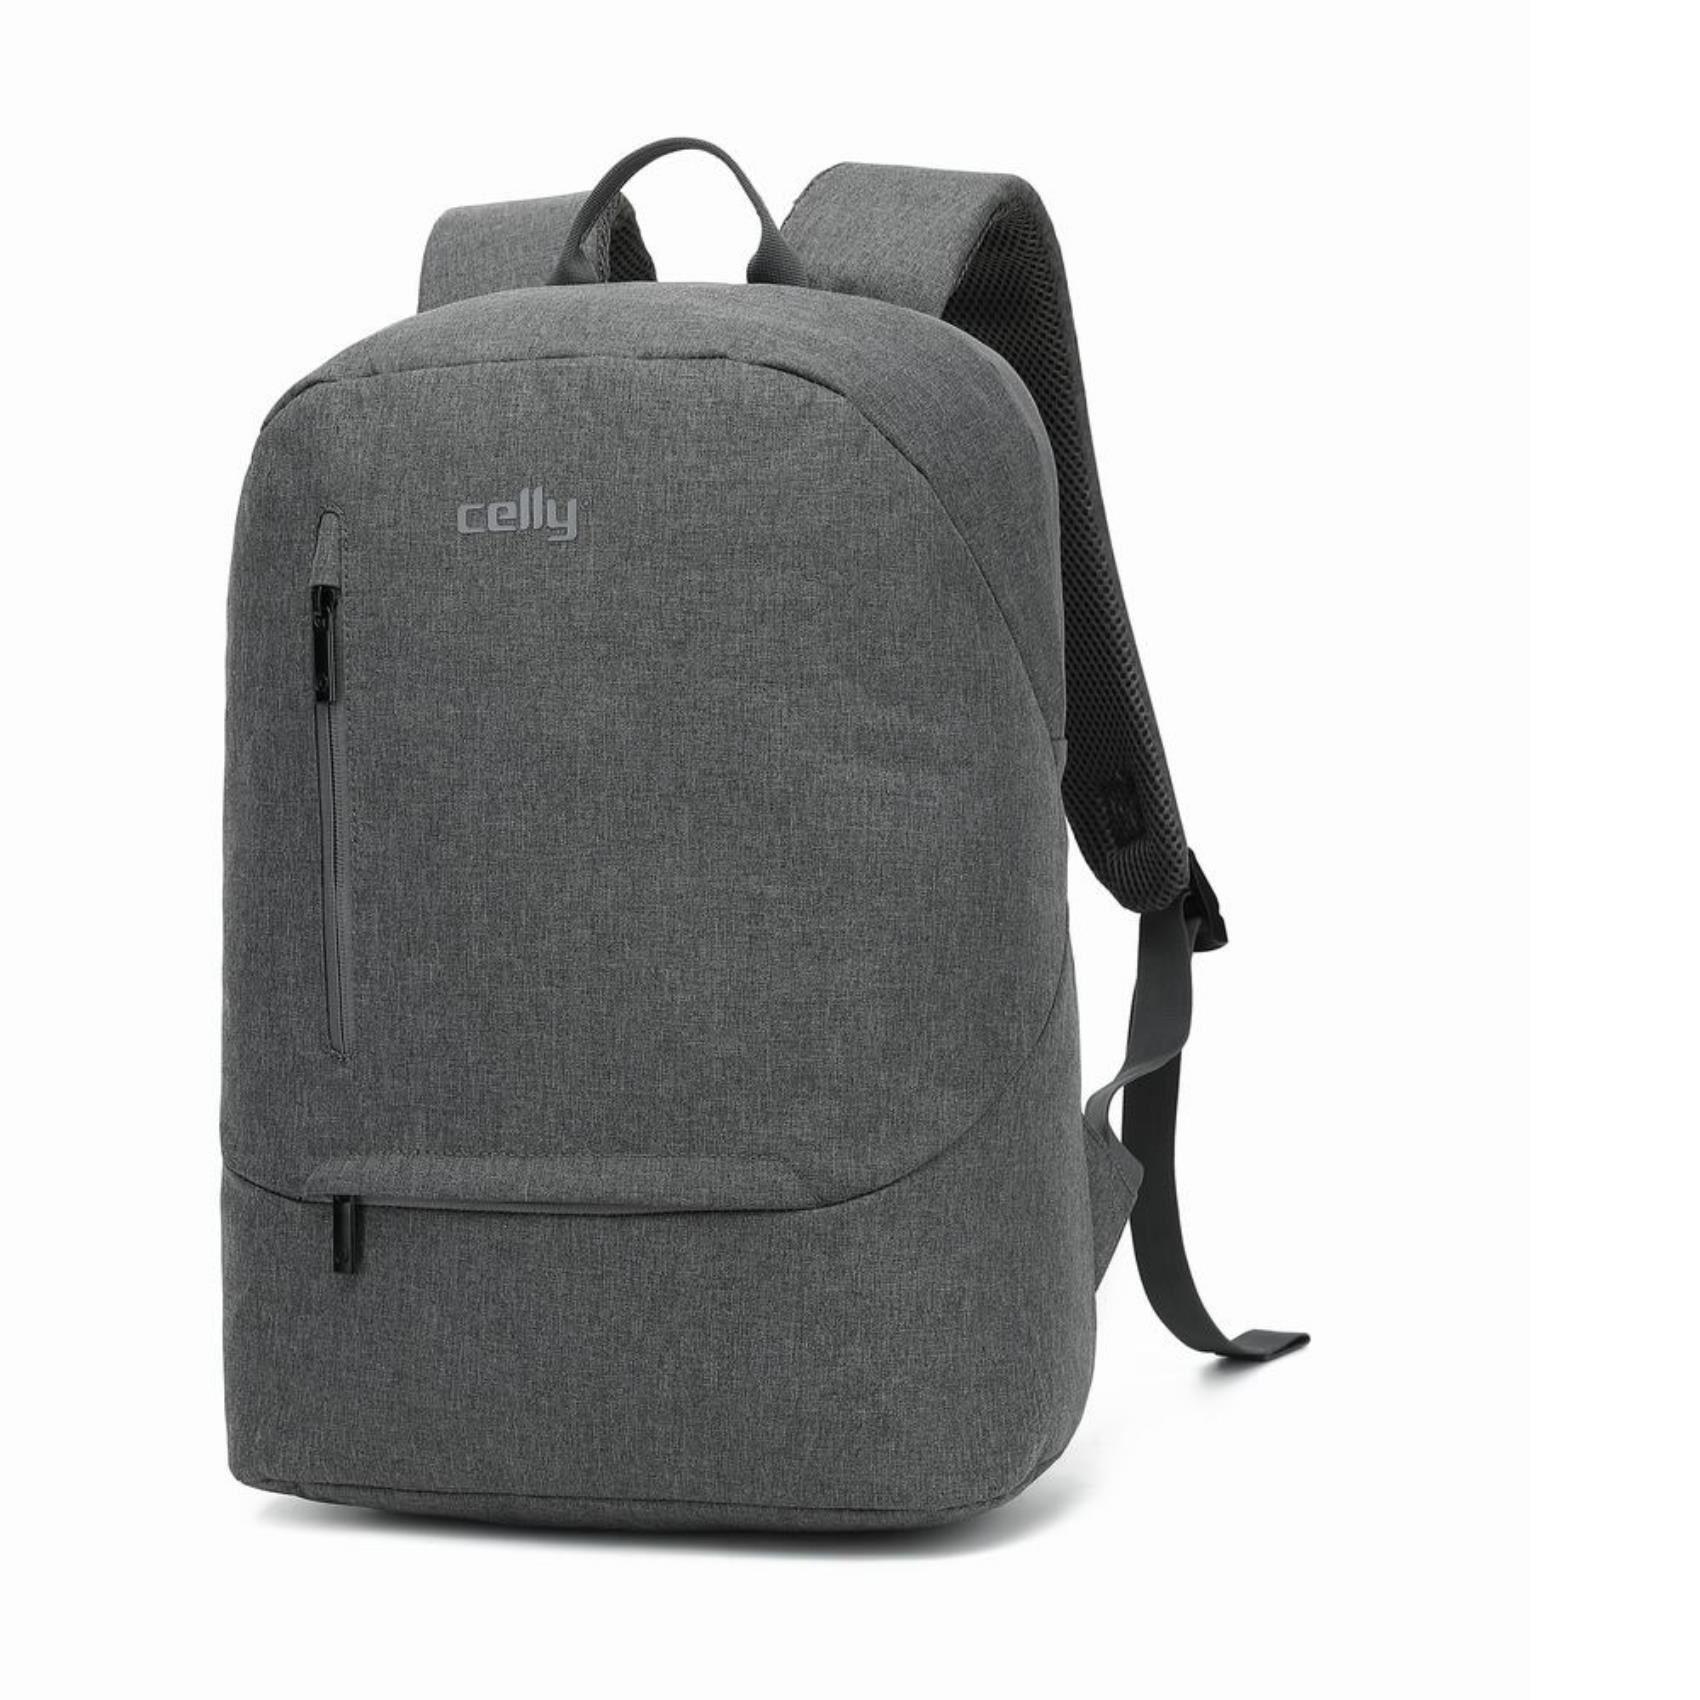 CELLY BACKPACK FOR TRAVEL GREY DAYPACKGR